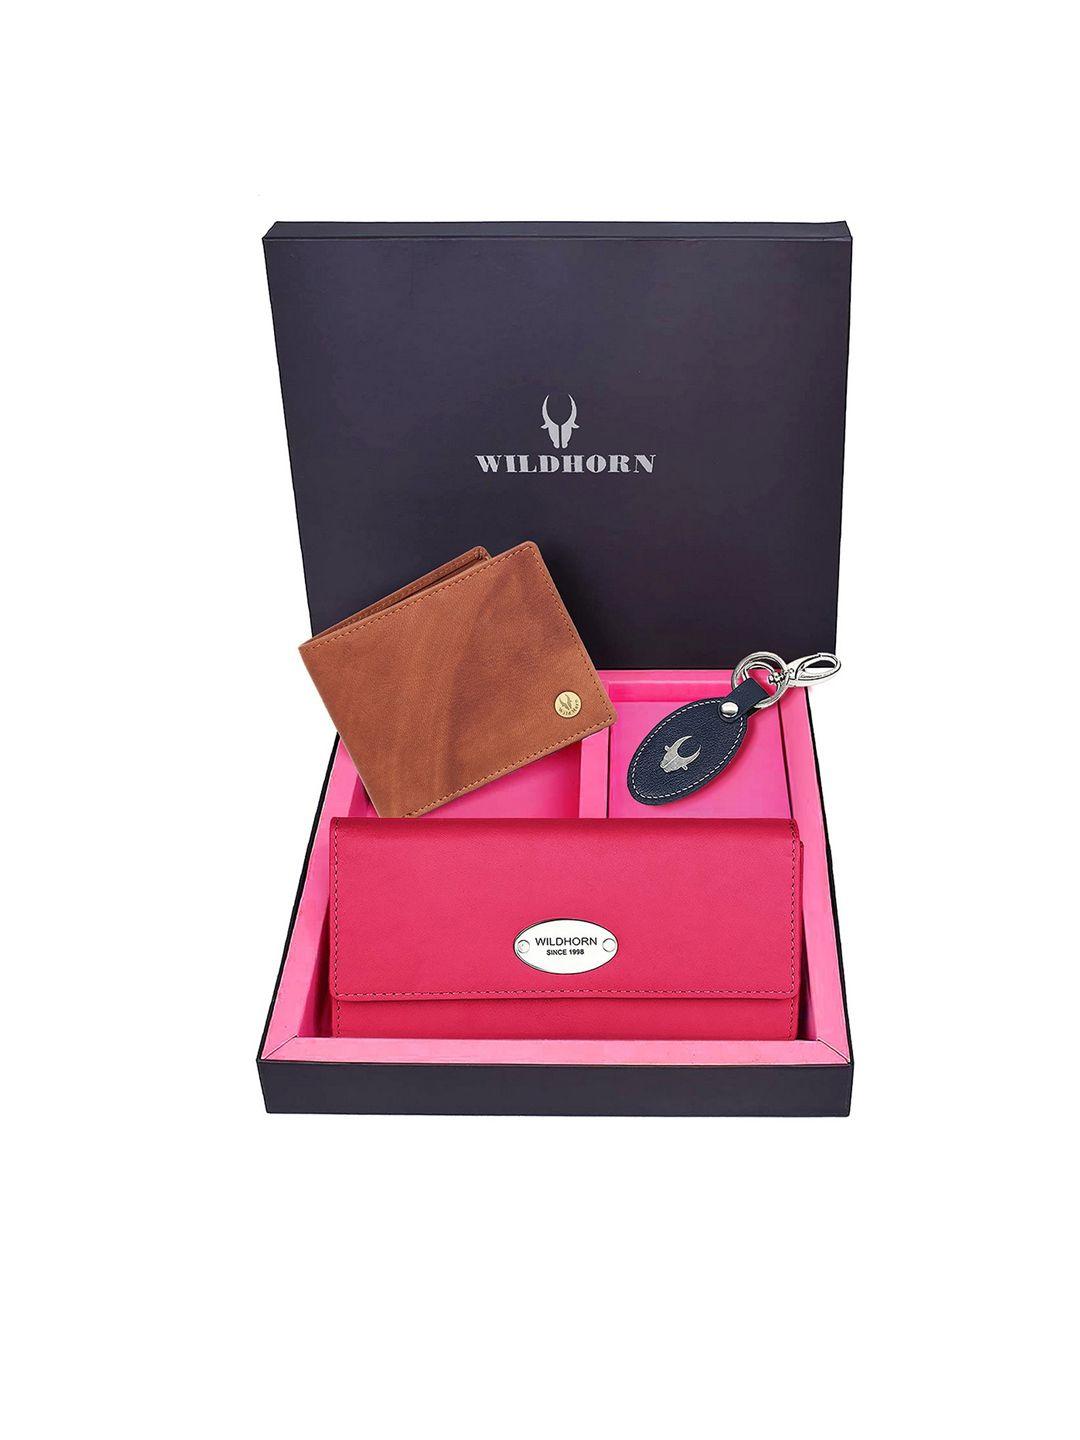 wildhorn brown and pink leather accessory gift set